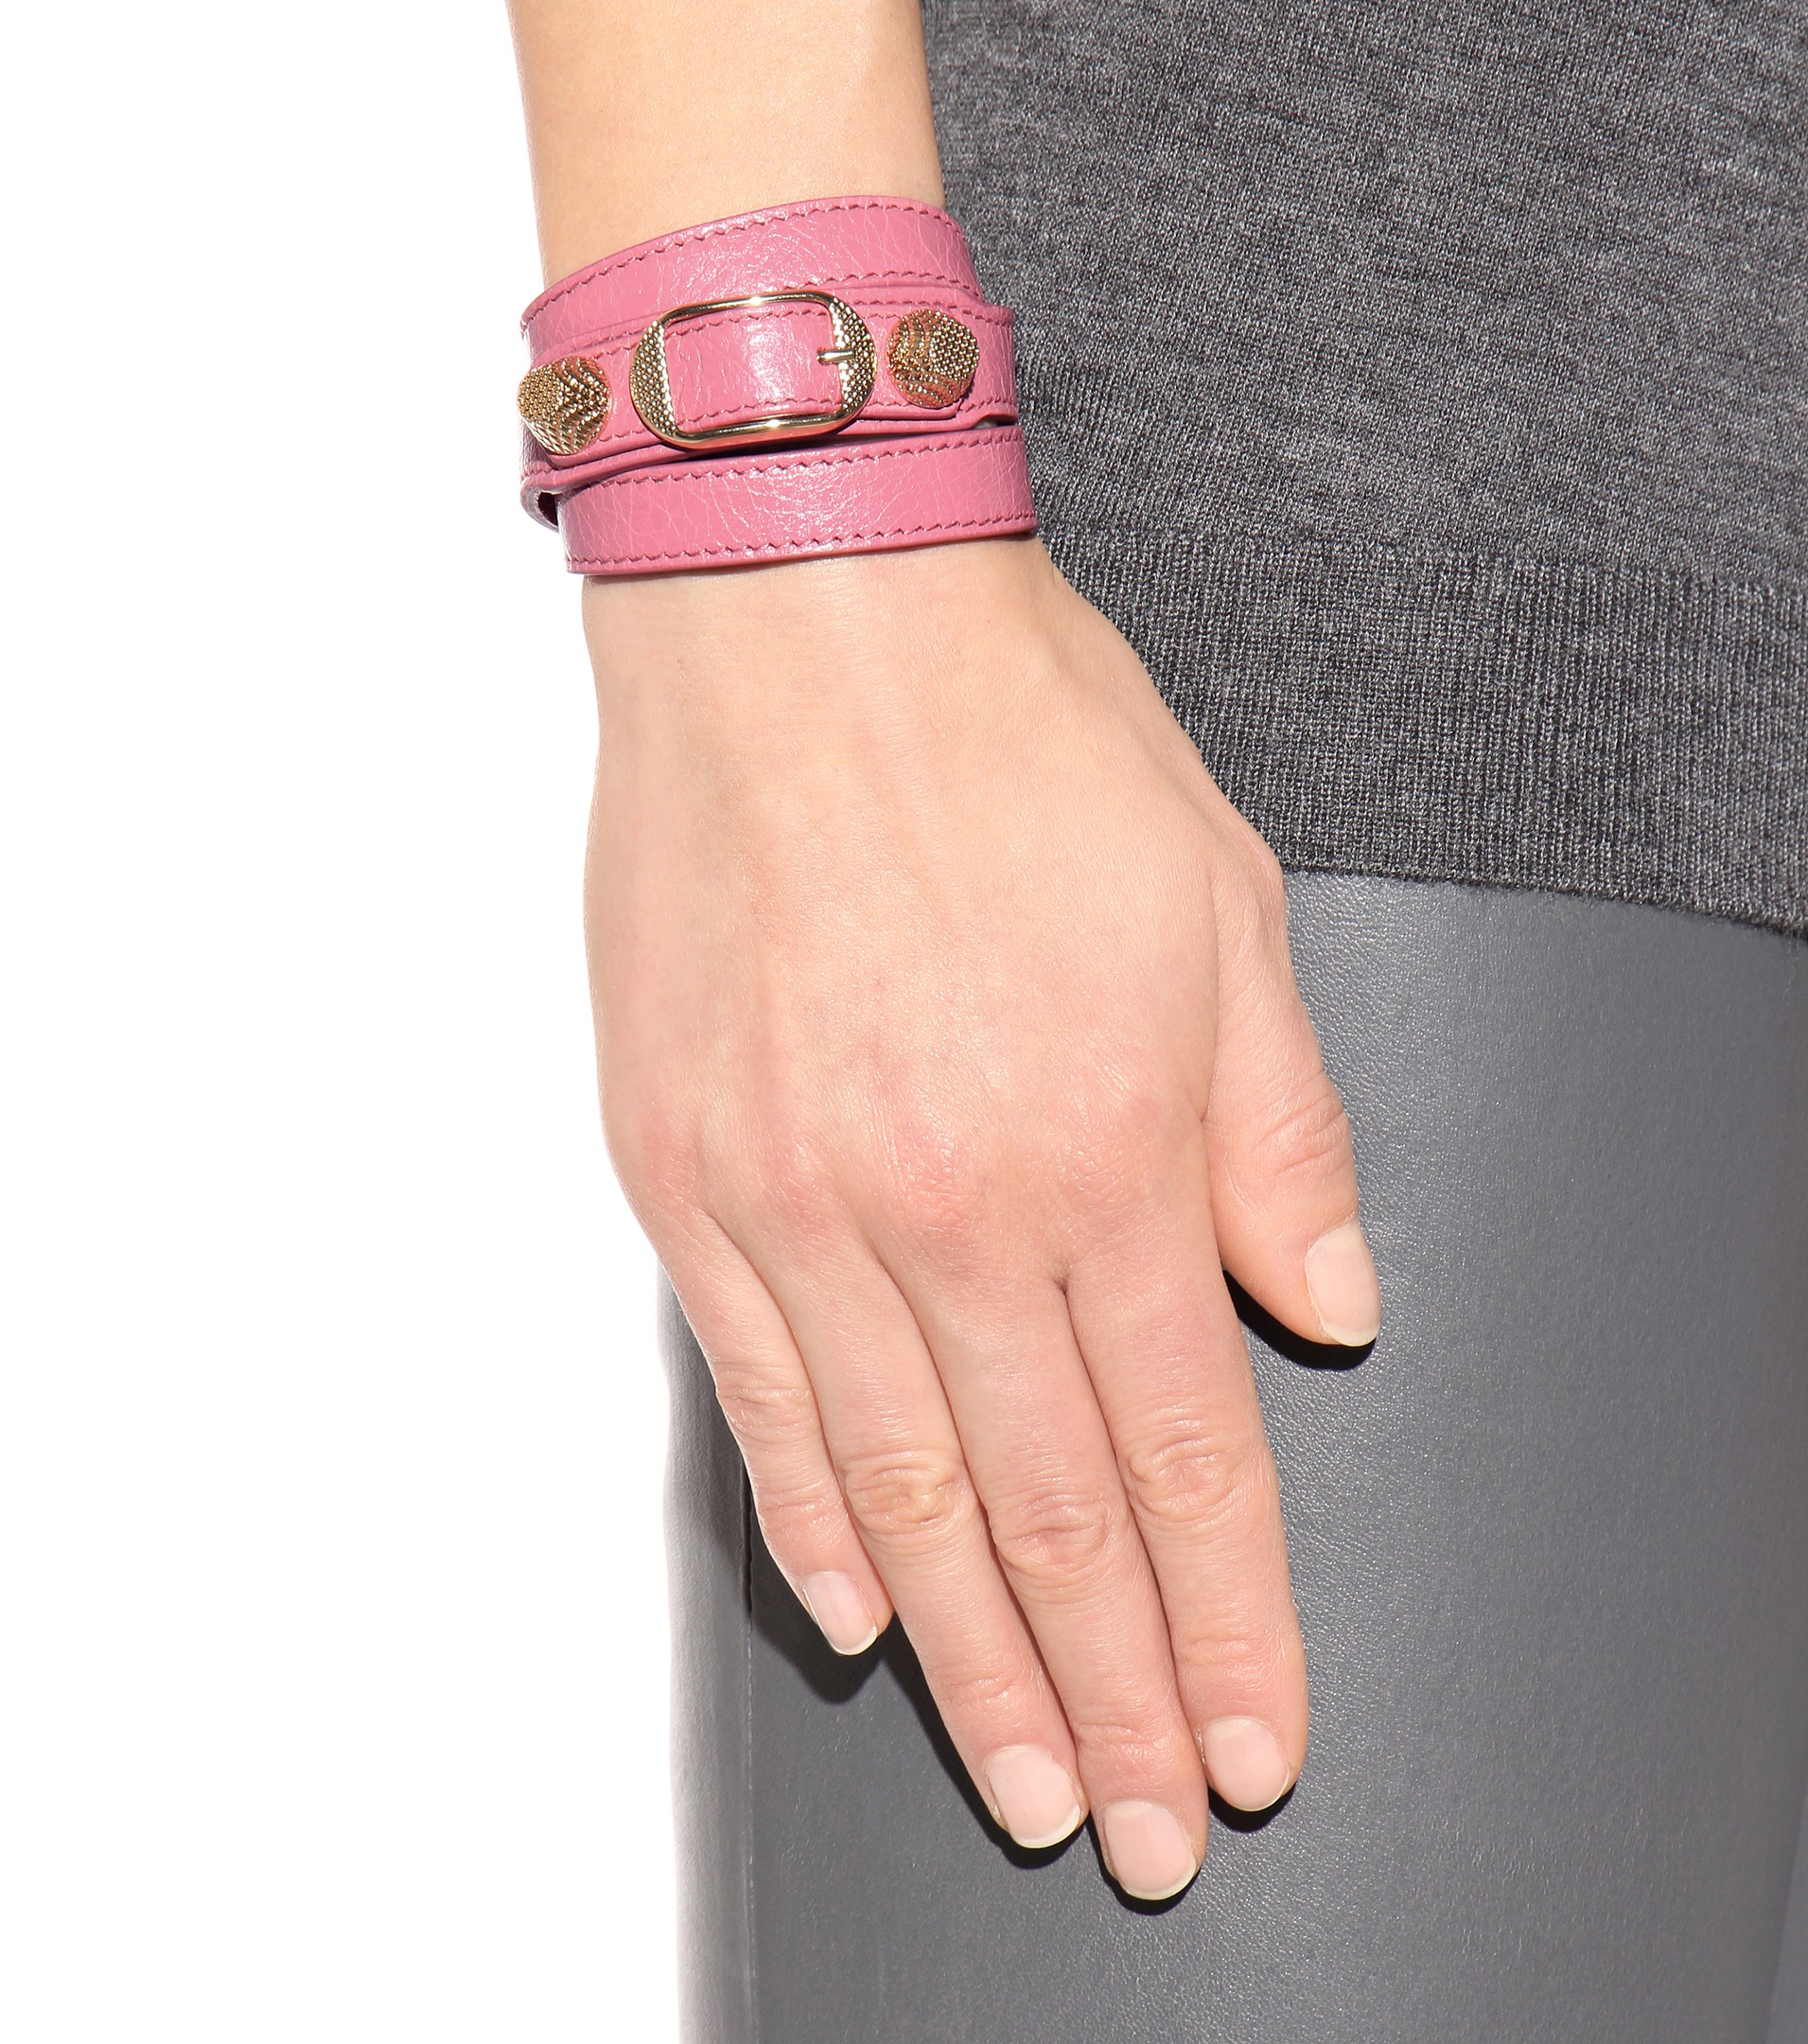 Balenciaga Giant Leather Bracelet in Pink - Lyst